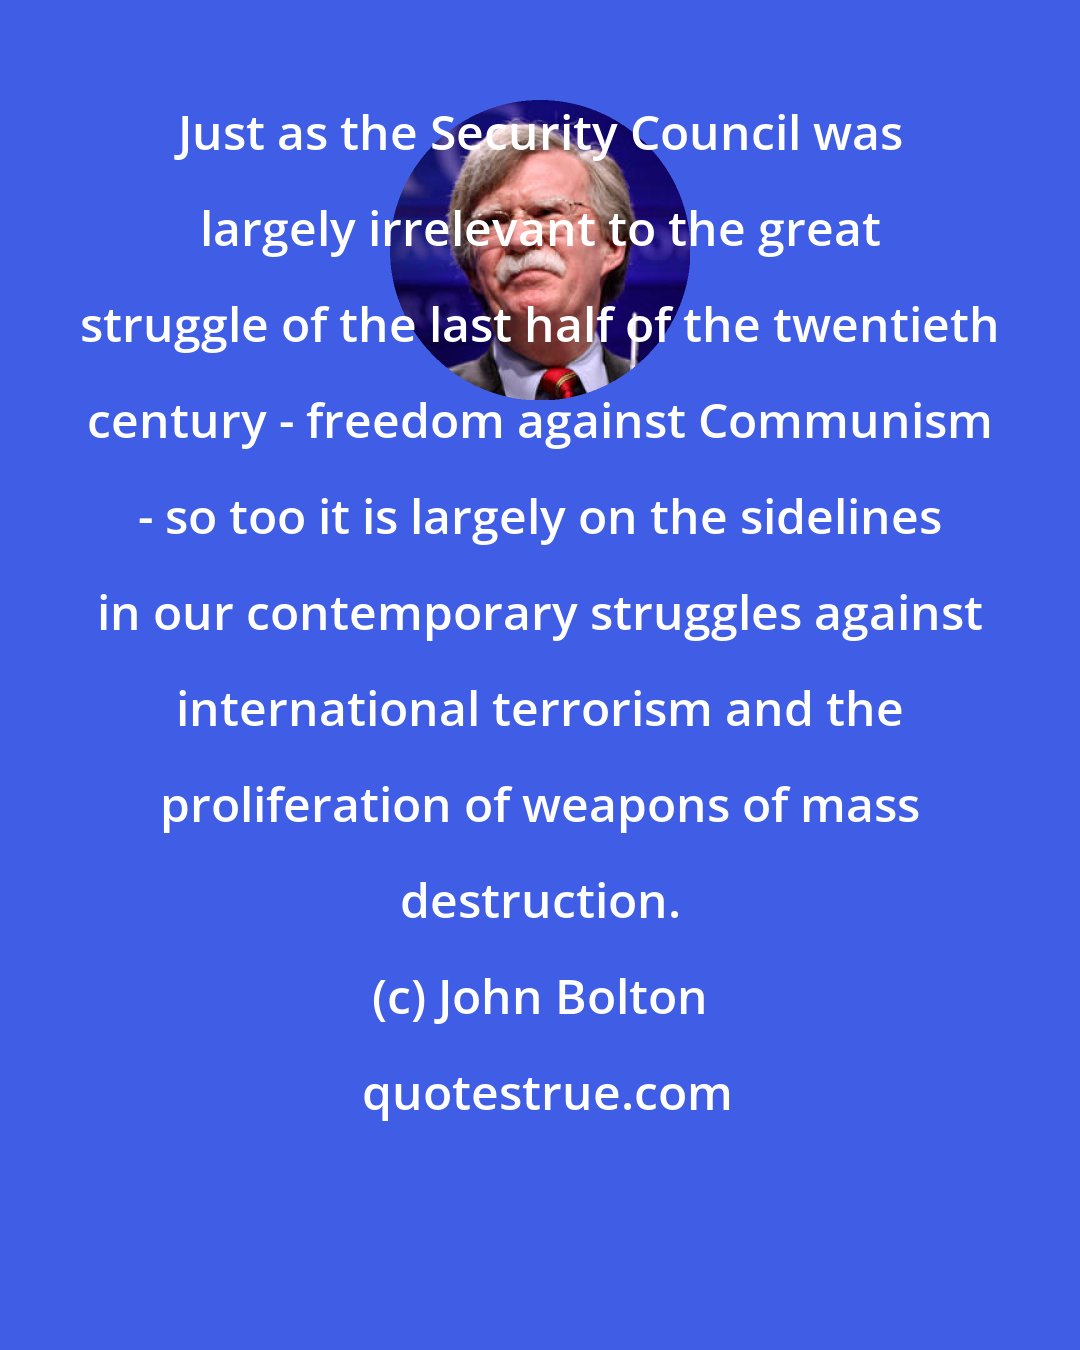 John Bolton: Just as the Security Council was largely irrelevant to the great struggle of the last half of the twentieth century - freedom against Communism - so too it is largely on the sidelines in our contemporary struggles against international terrorism and the proliferation of weapons of mass destruction.